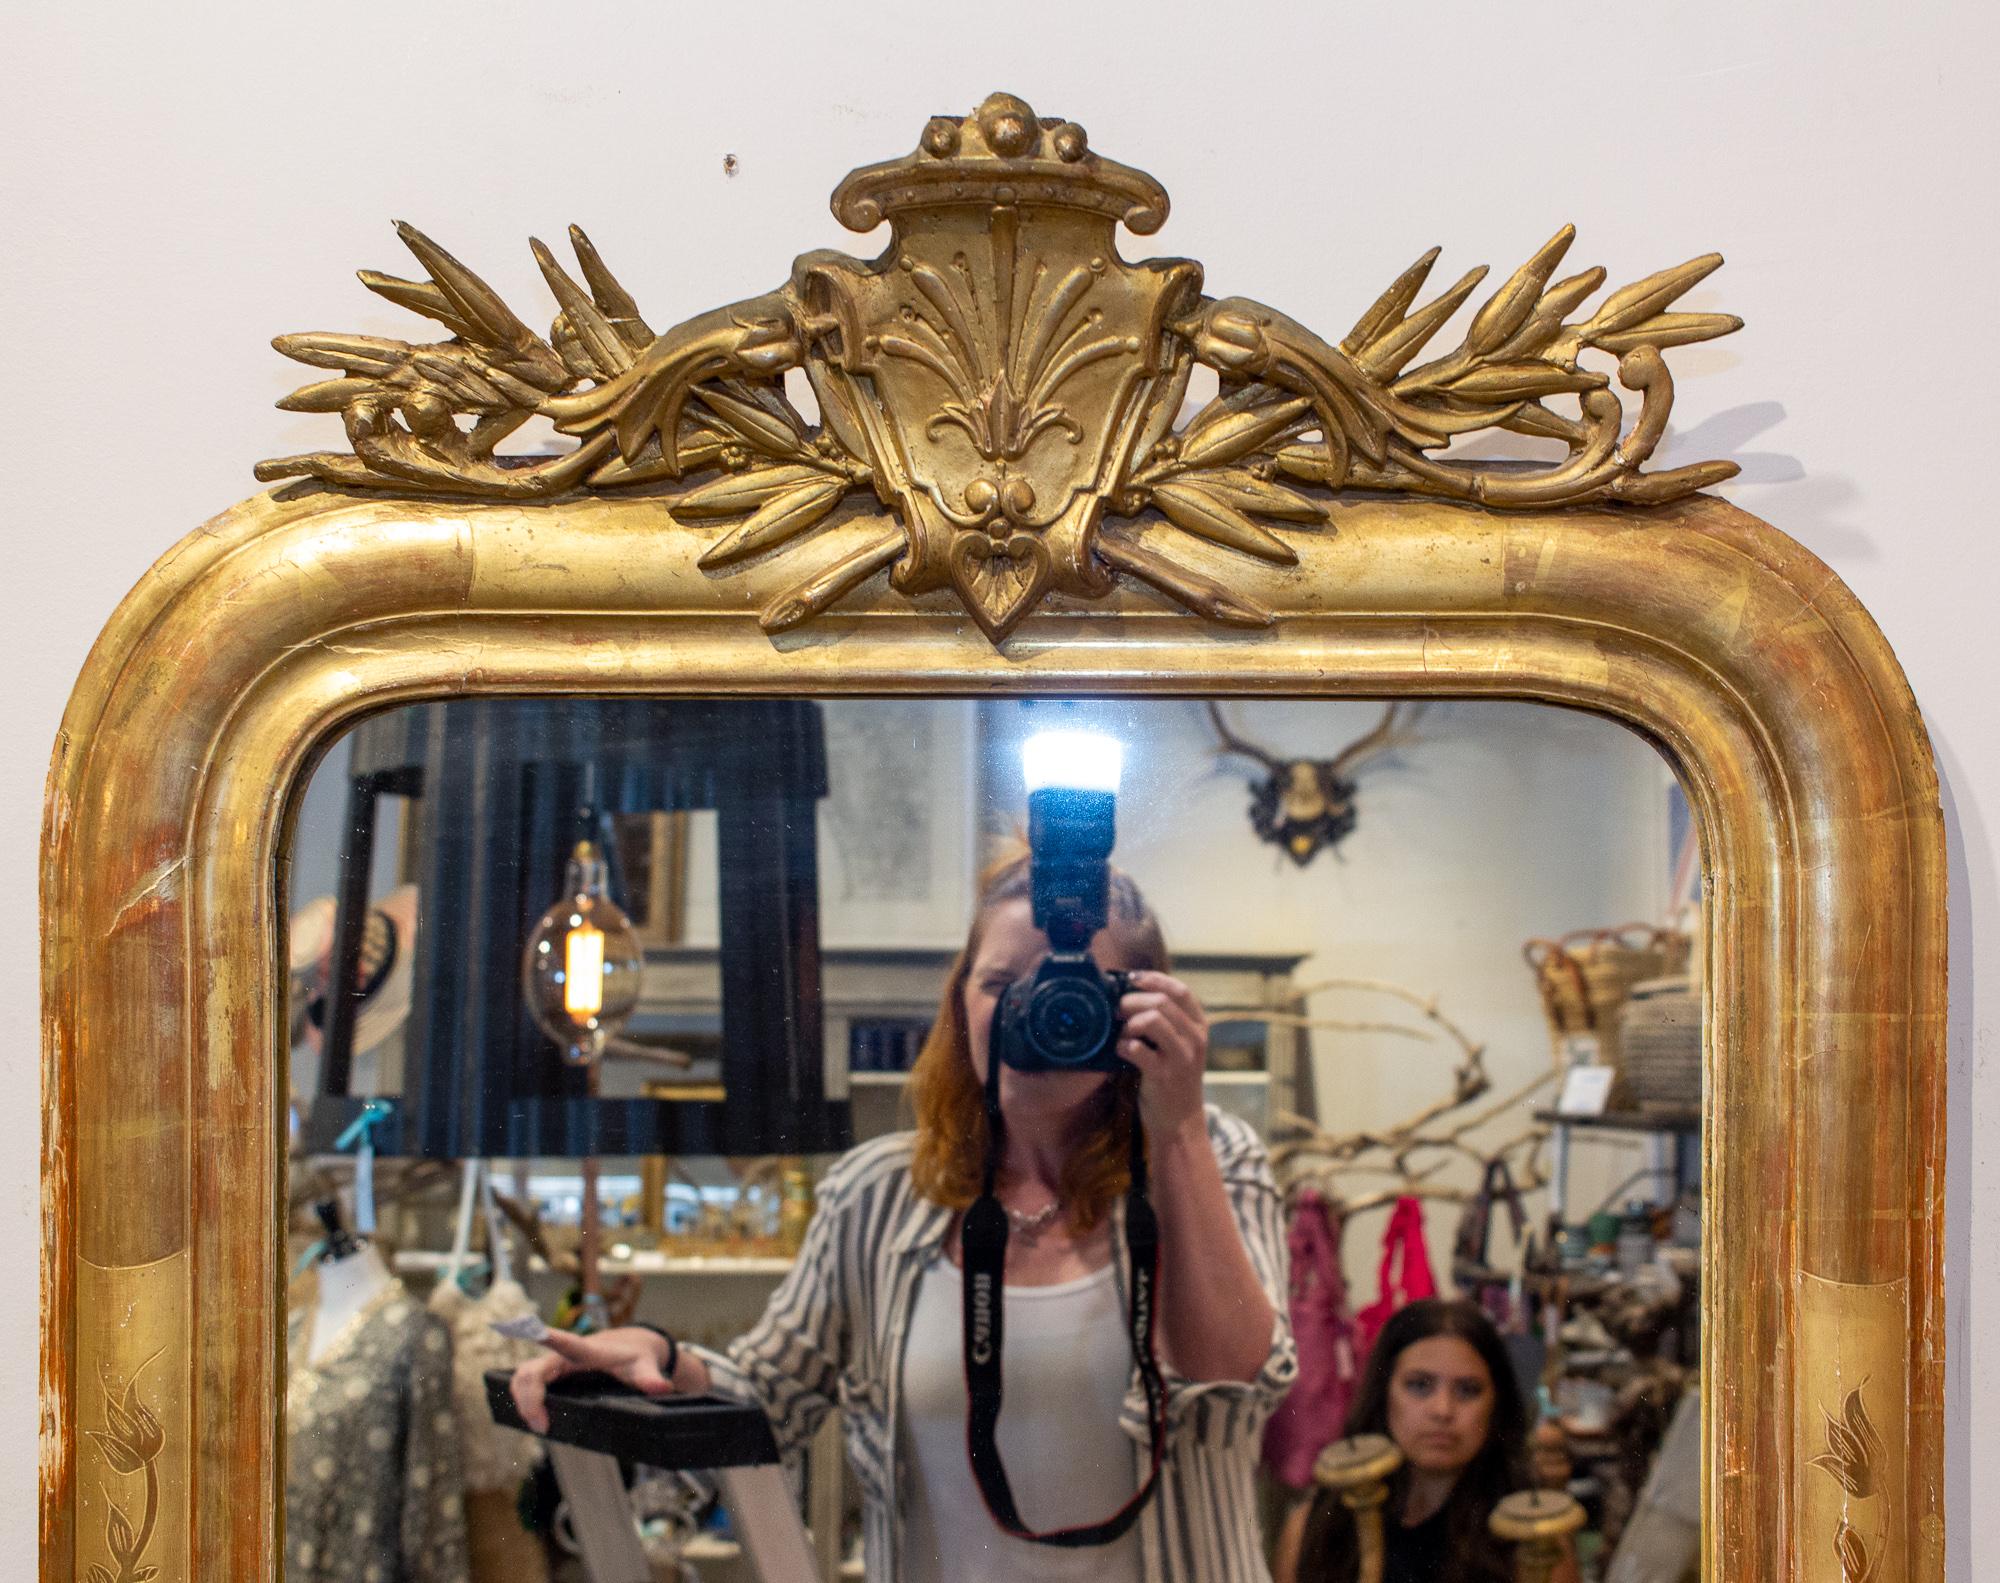 19th Century Antique French Gilt Louis Philippe Mirror with Ornate Cartouche and Floral Frame